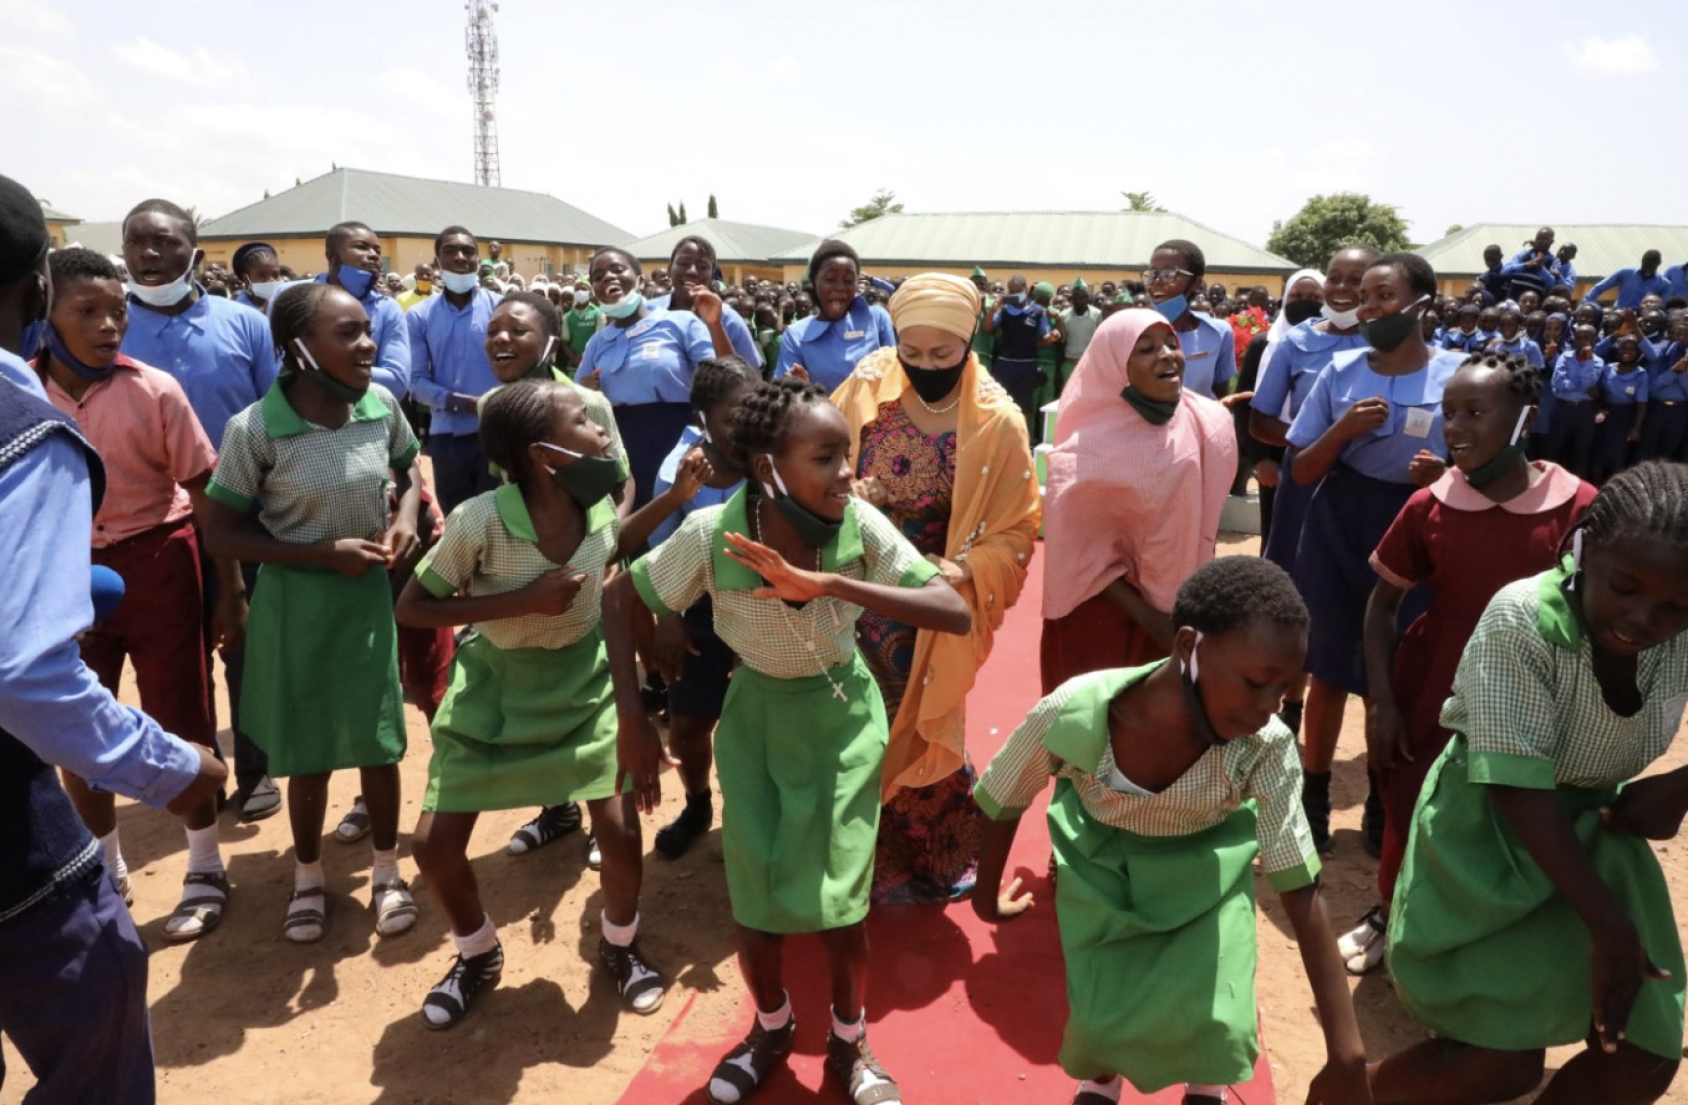 Several people stand together while children dressed in their green school uniform dance in the center of the group. 